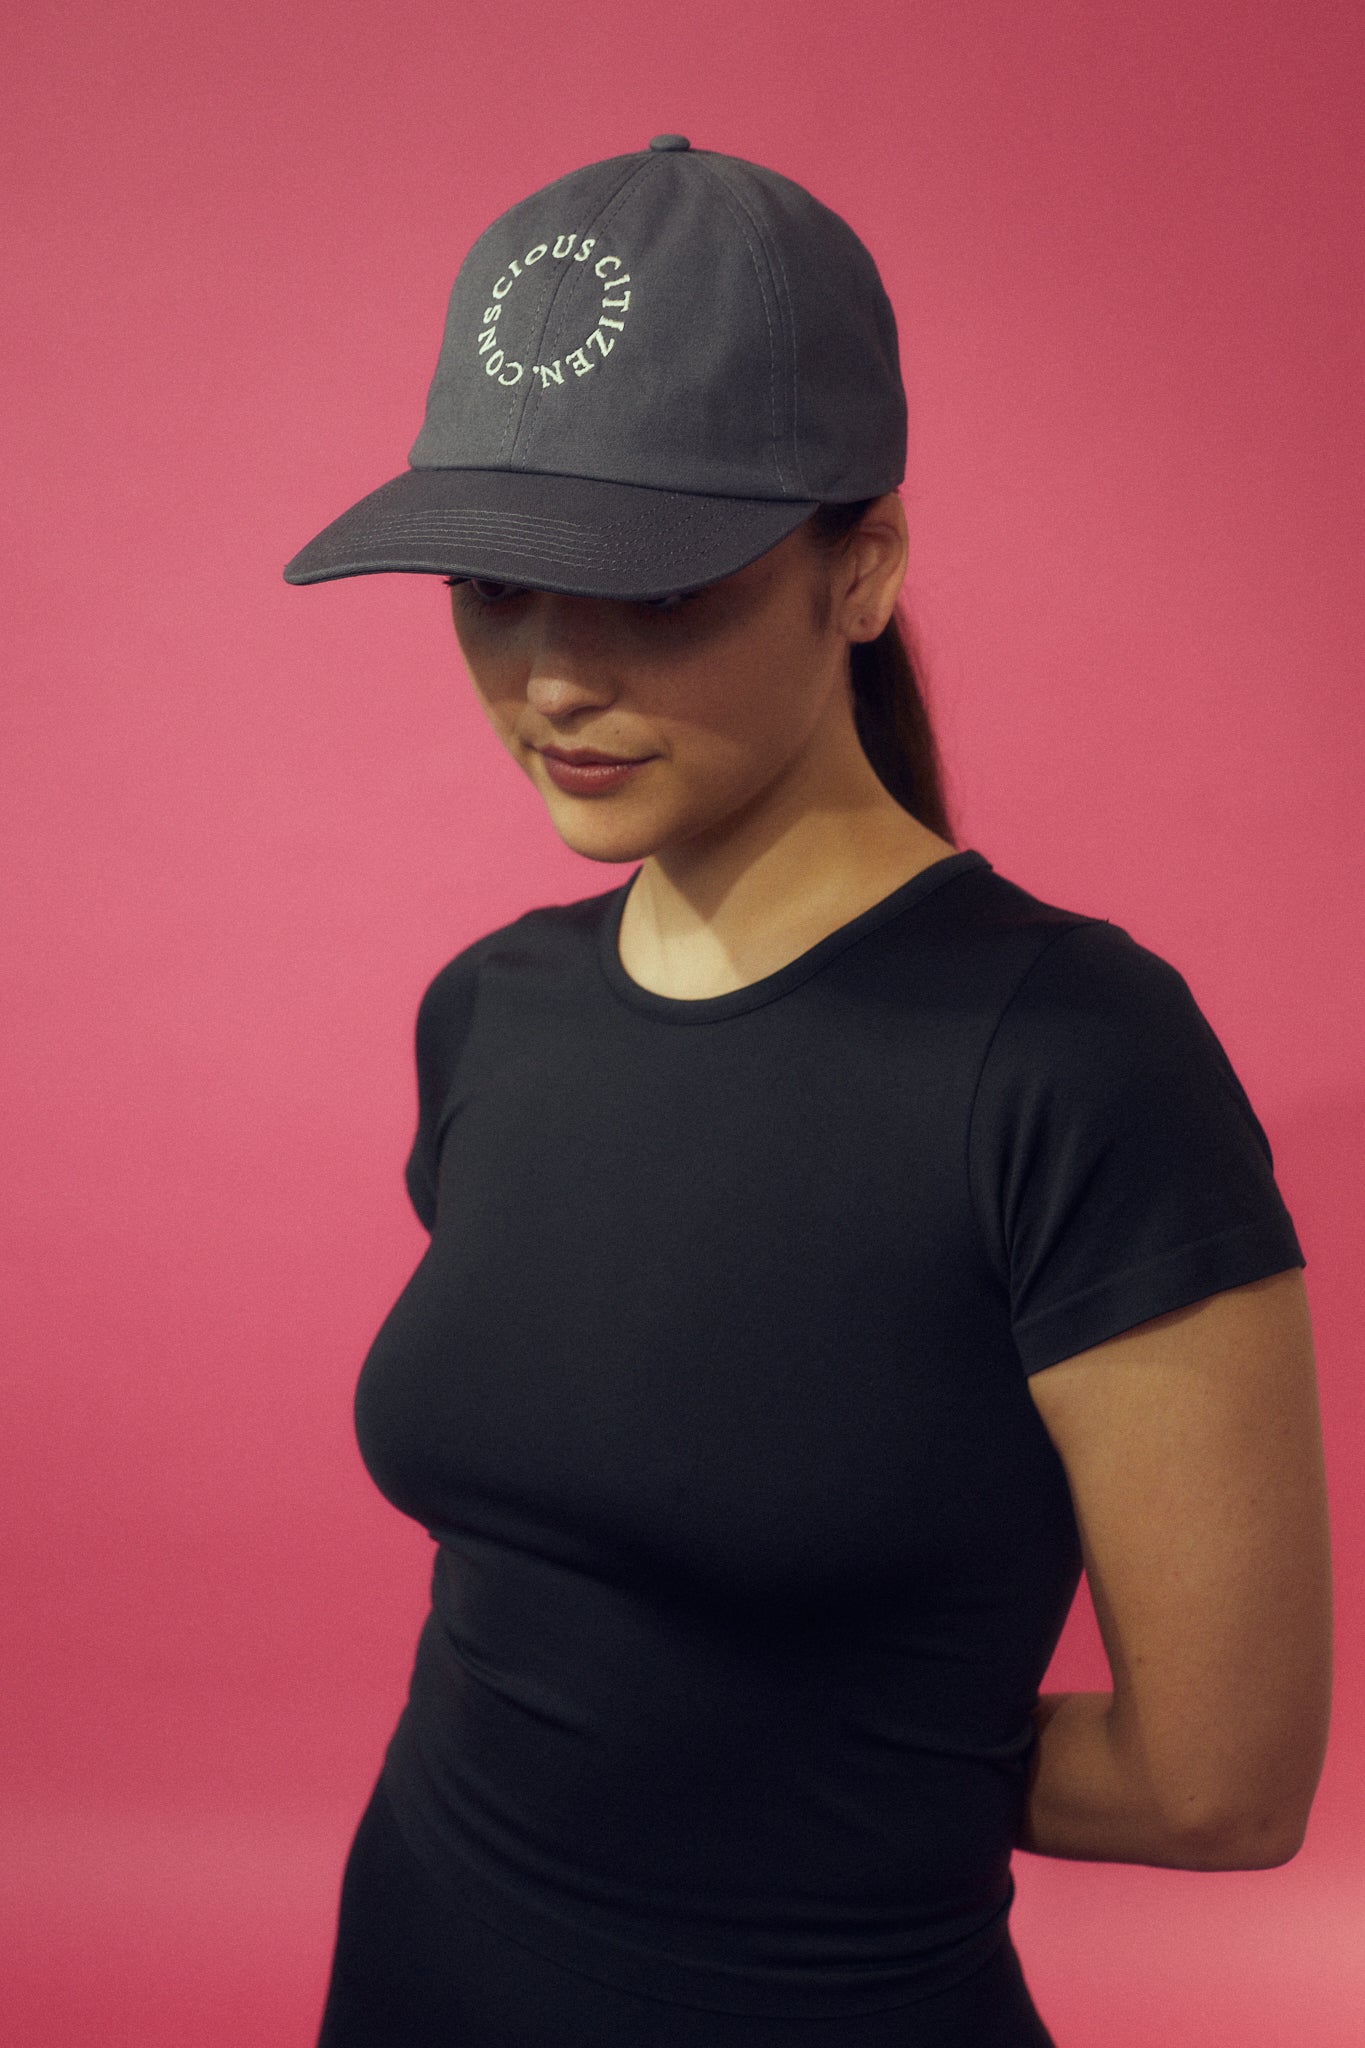  Elevate your everyday style with a sustainable cap made from recycled materials and organic cotton